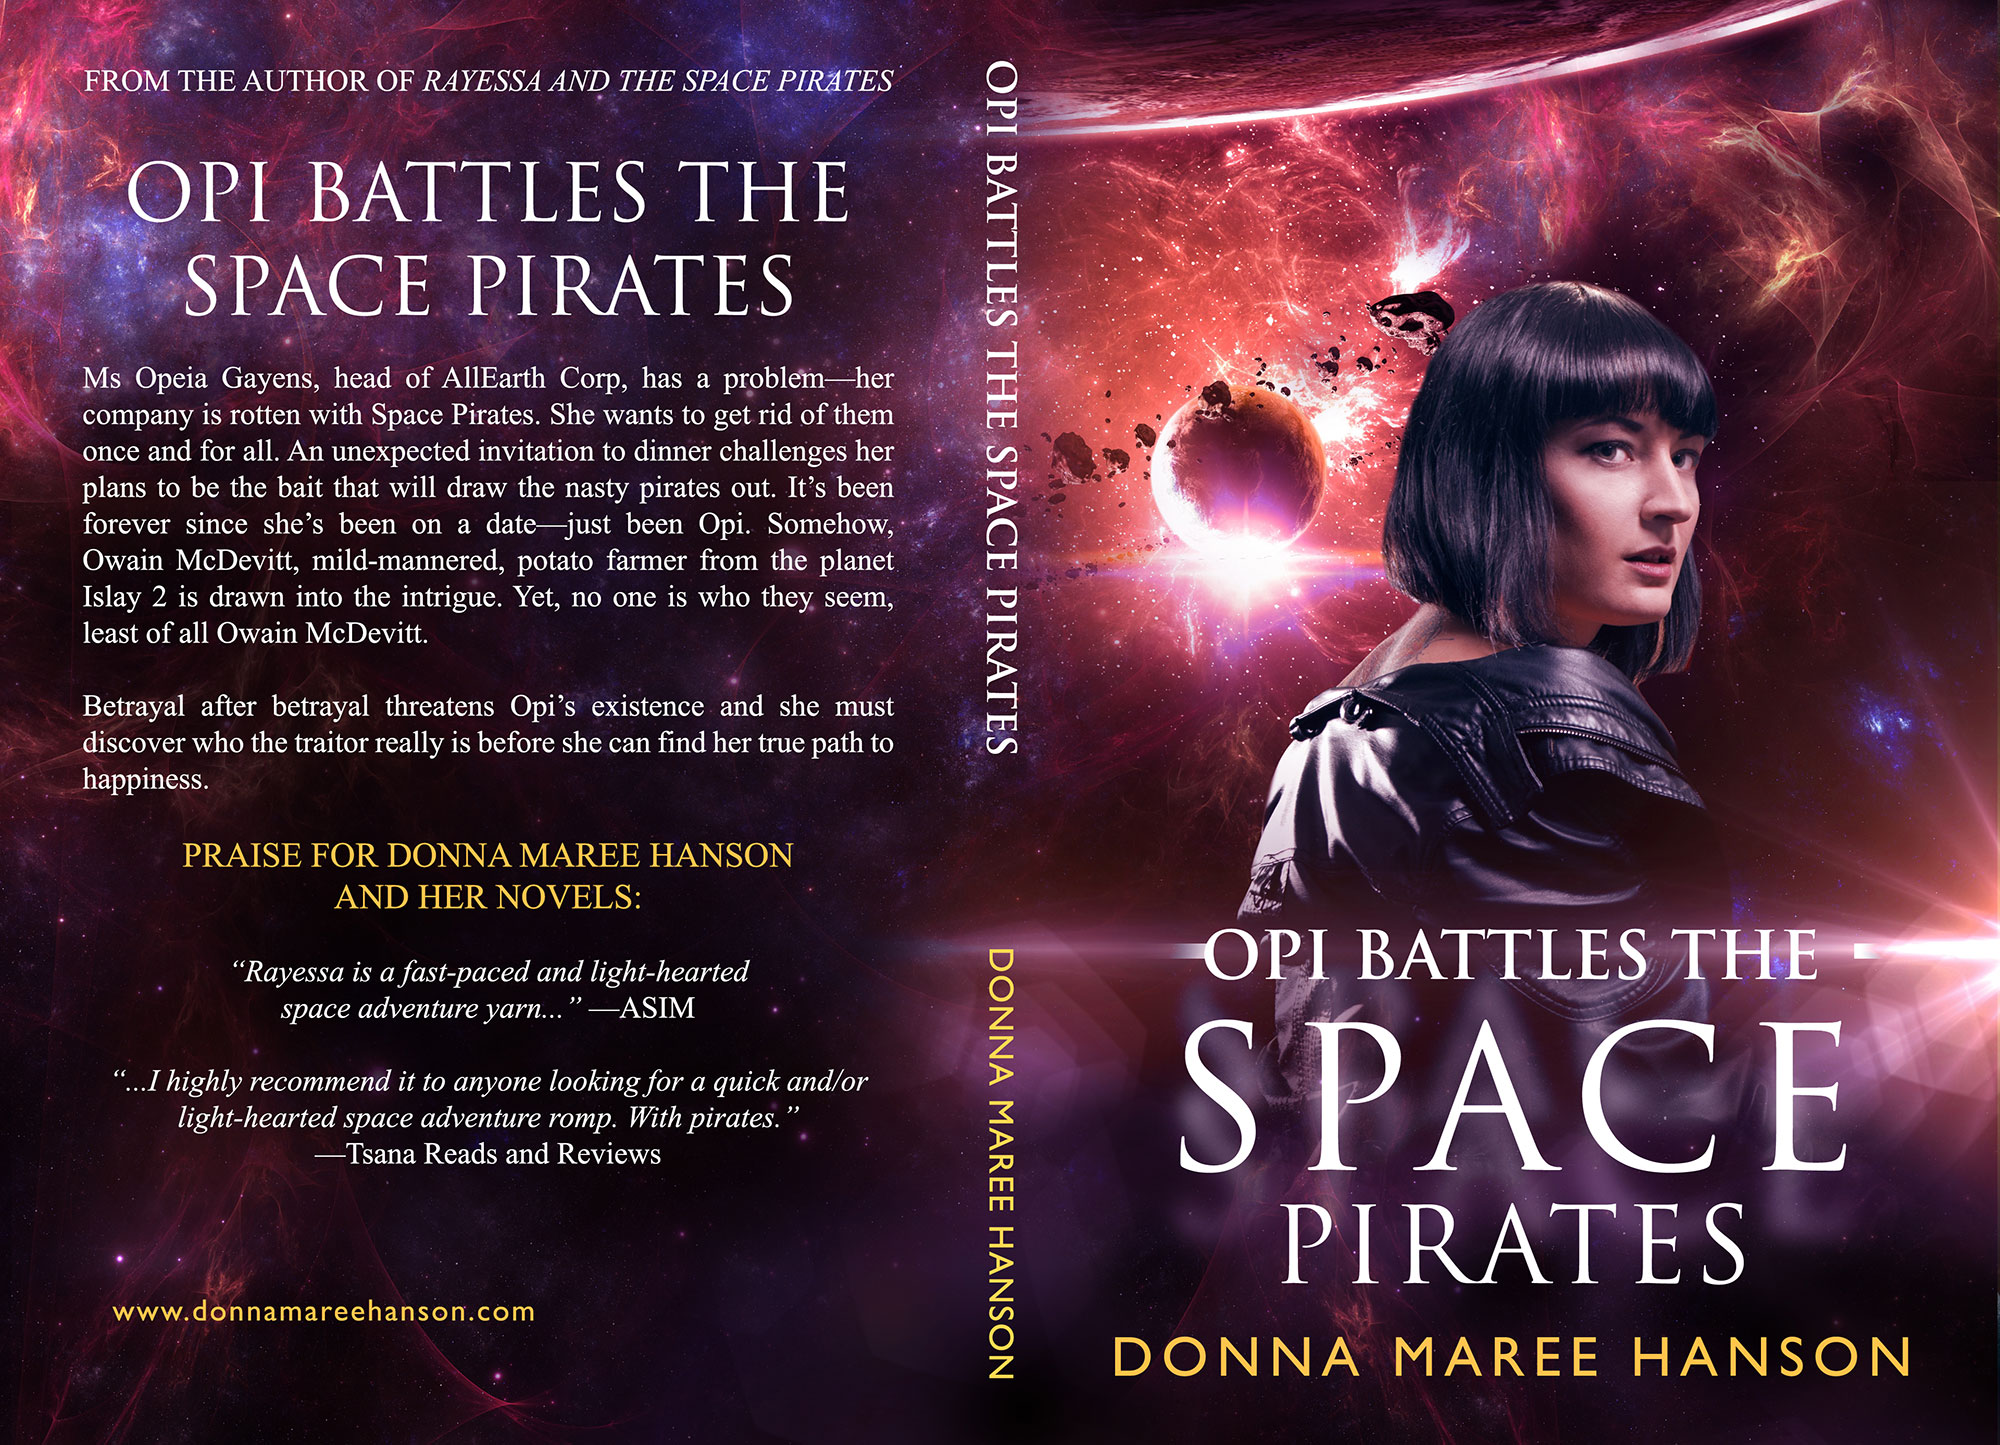 OPI Battles the Space Pirates by Donna Maree Hanson (Print Coverflat)